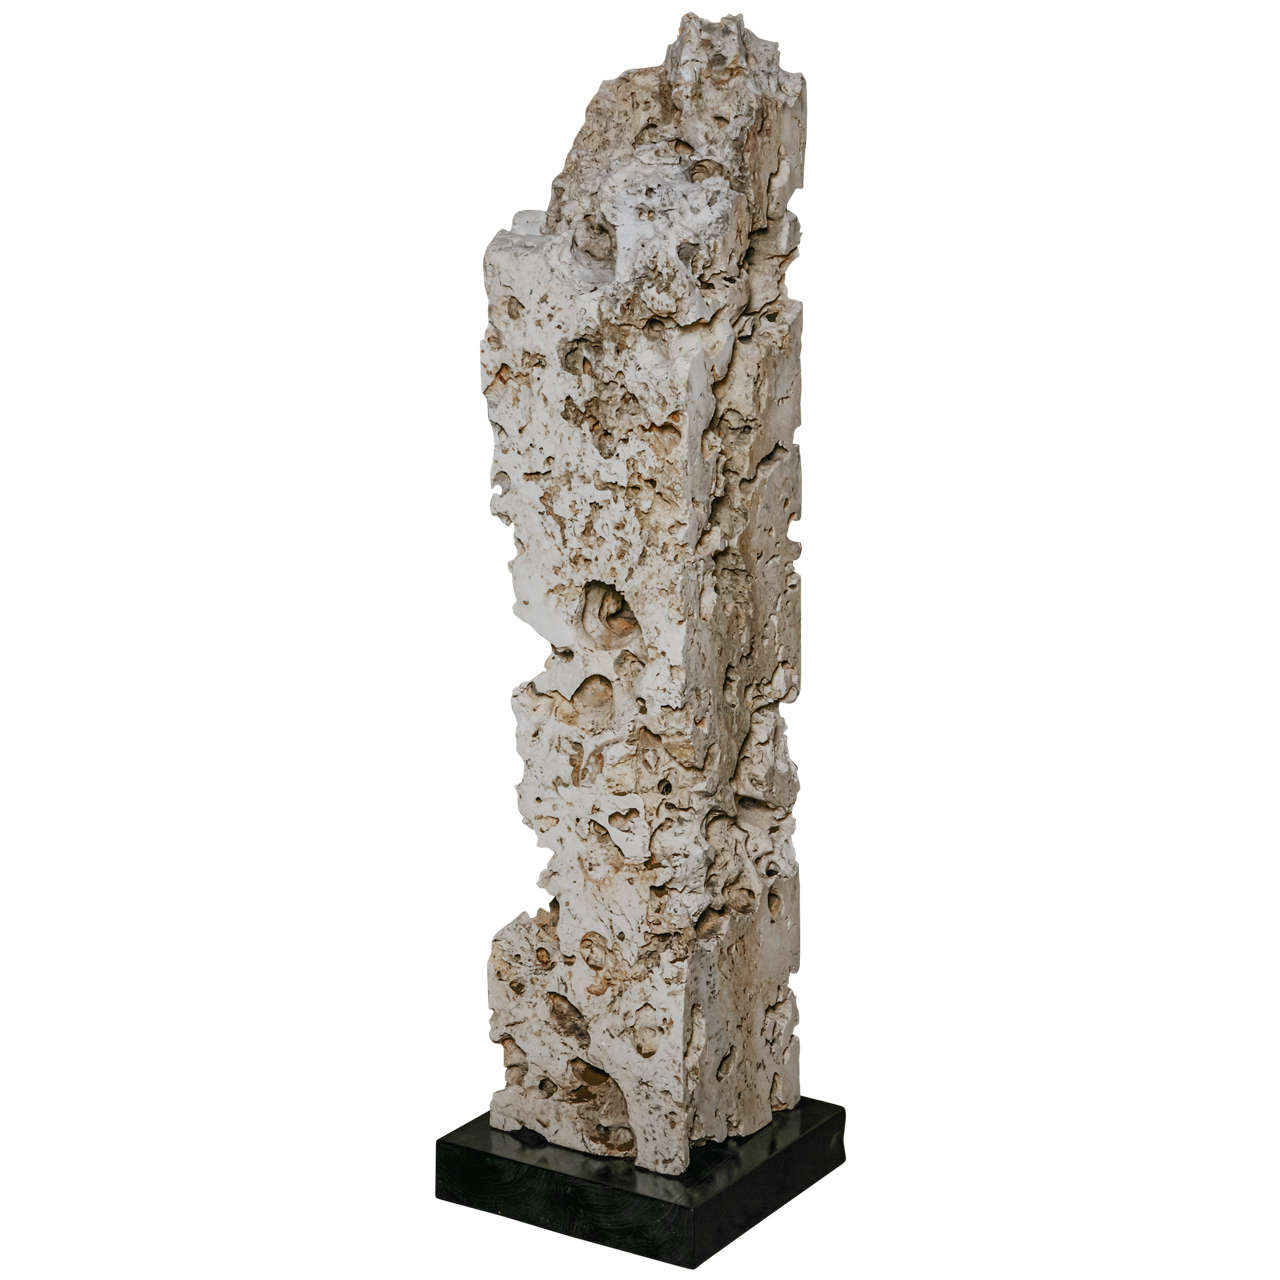 20th c. Chinese Scholar's Rock Sculpture